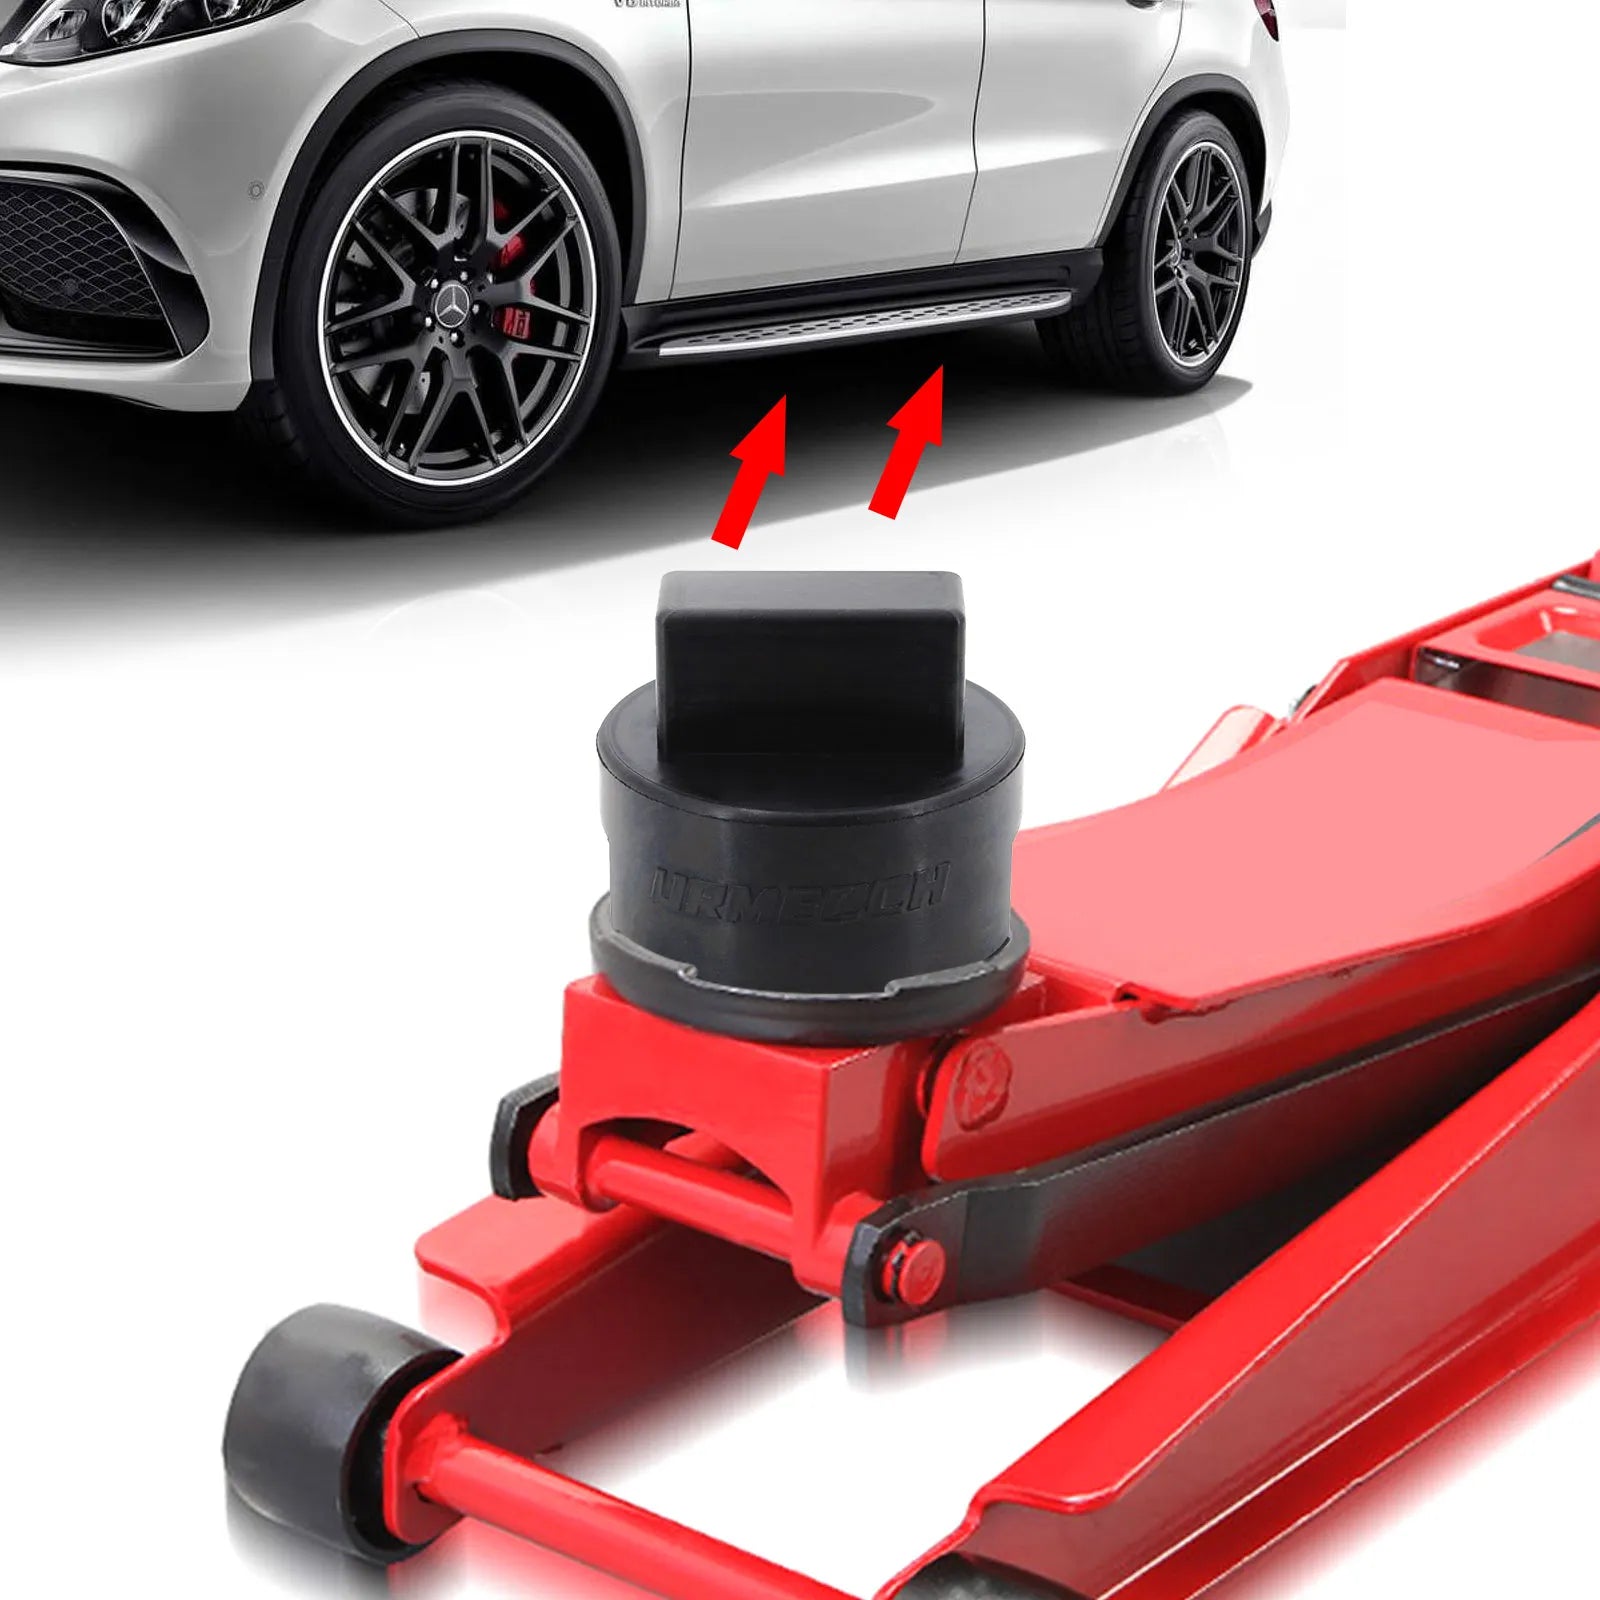 Car Jack Stand Adapter Rubber Pad Vehicle Frame Protector for Mercedes A B C E Class COUPE GLS GL M R S W203 W204 W212 W211 W164